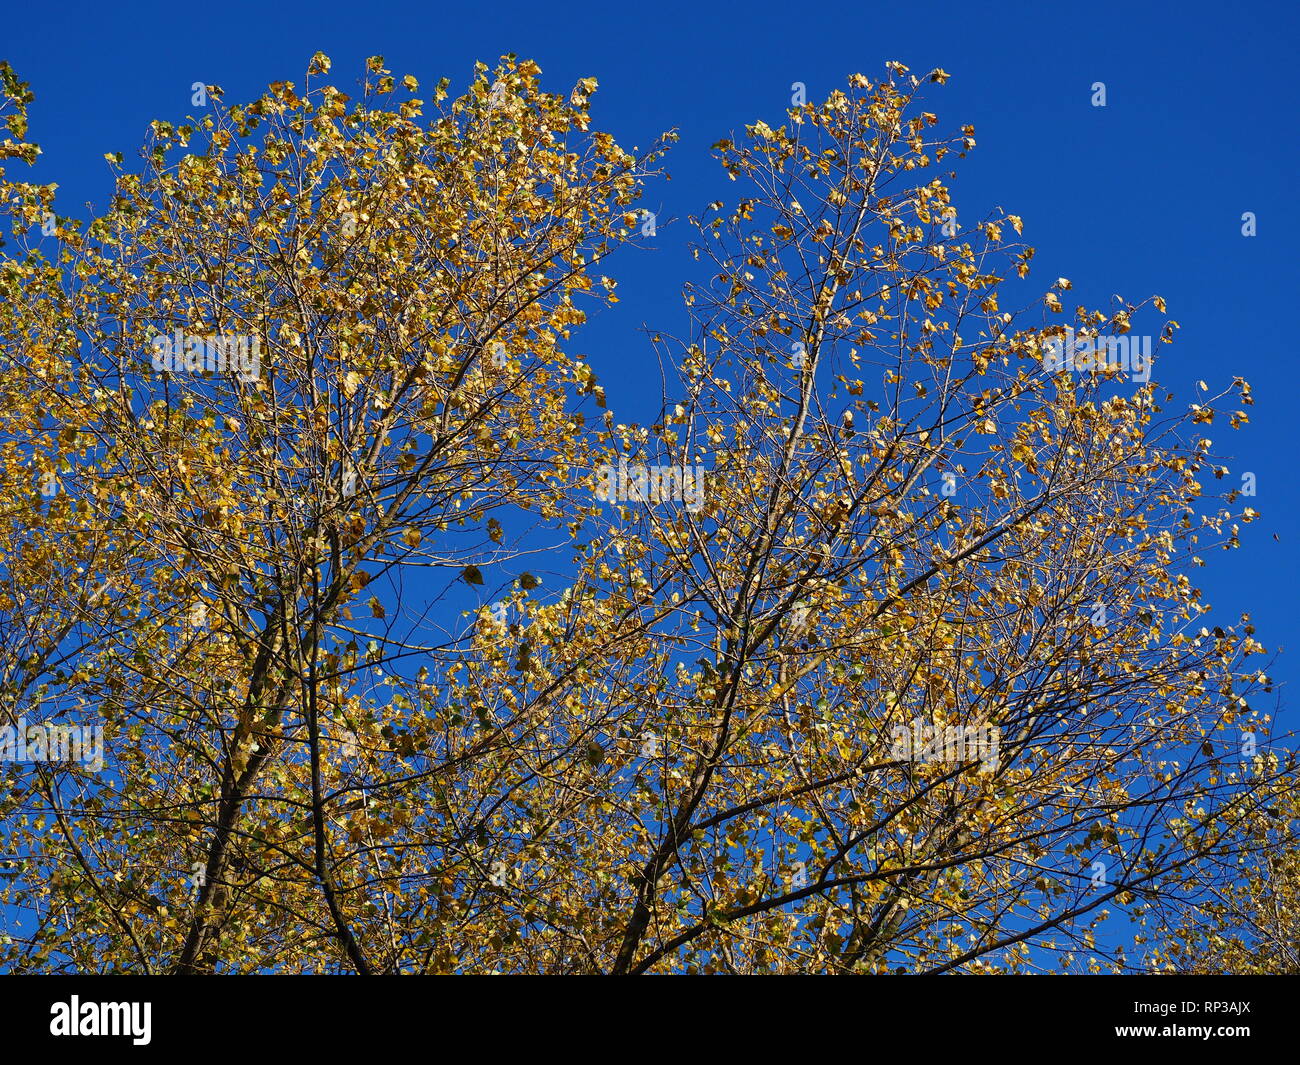 Bright yellow leaves on young alder trees in autumn against a clear dark blue sky Stock Photo